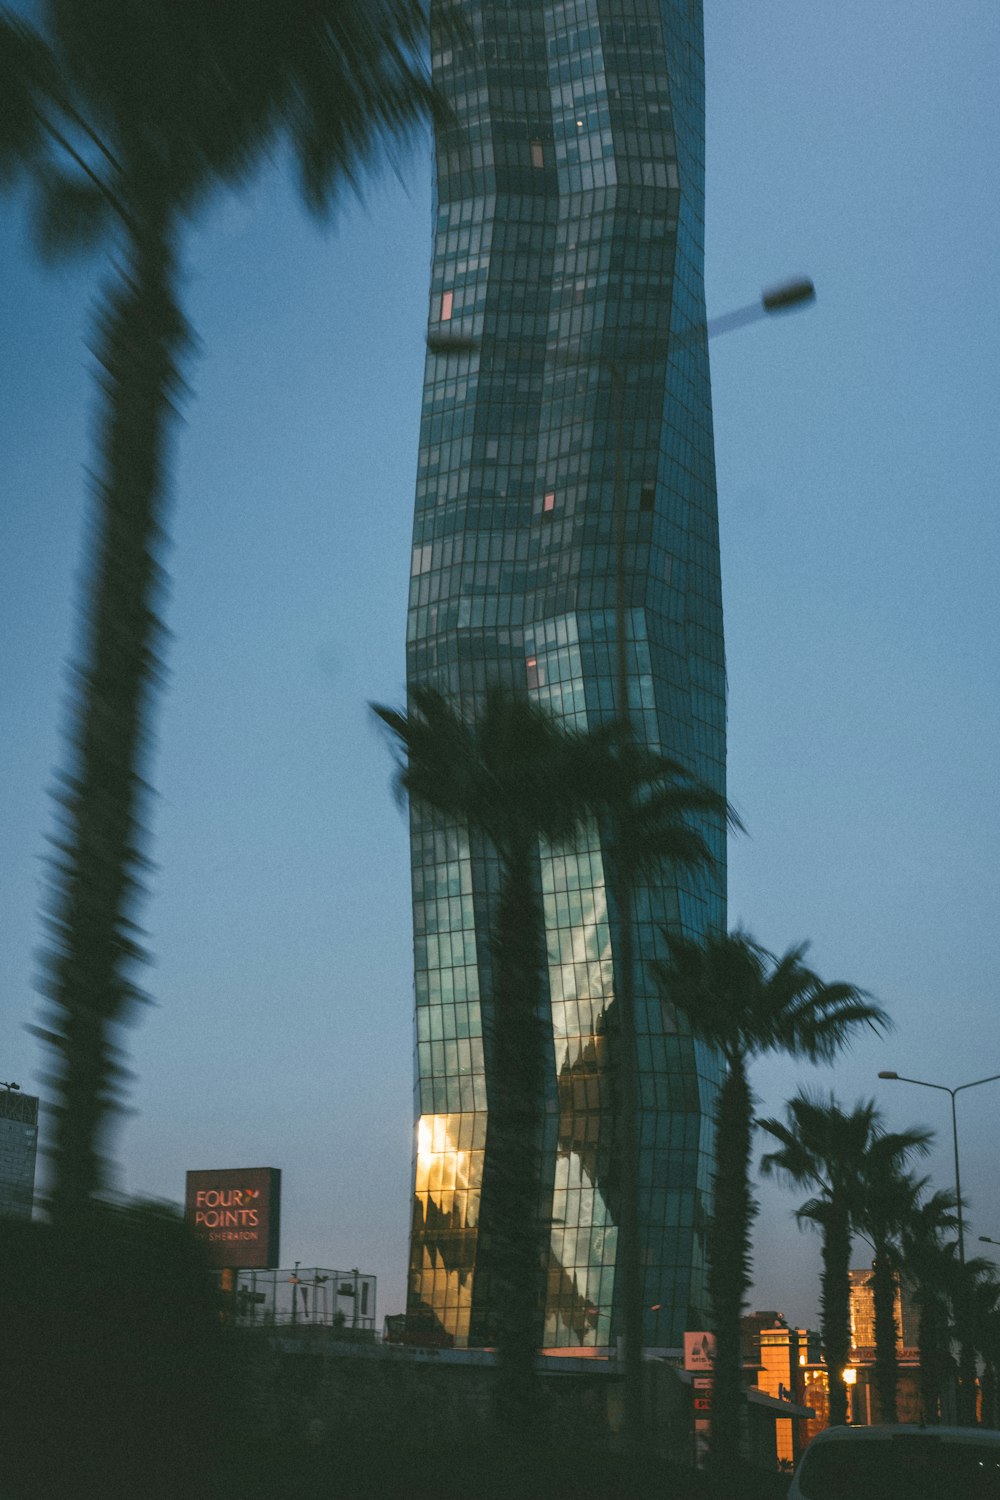 a tall building with a lot of windows next to palm trees